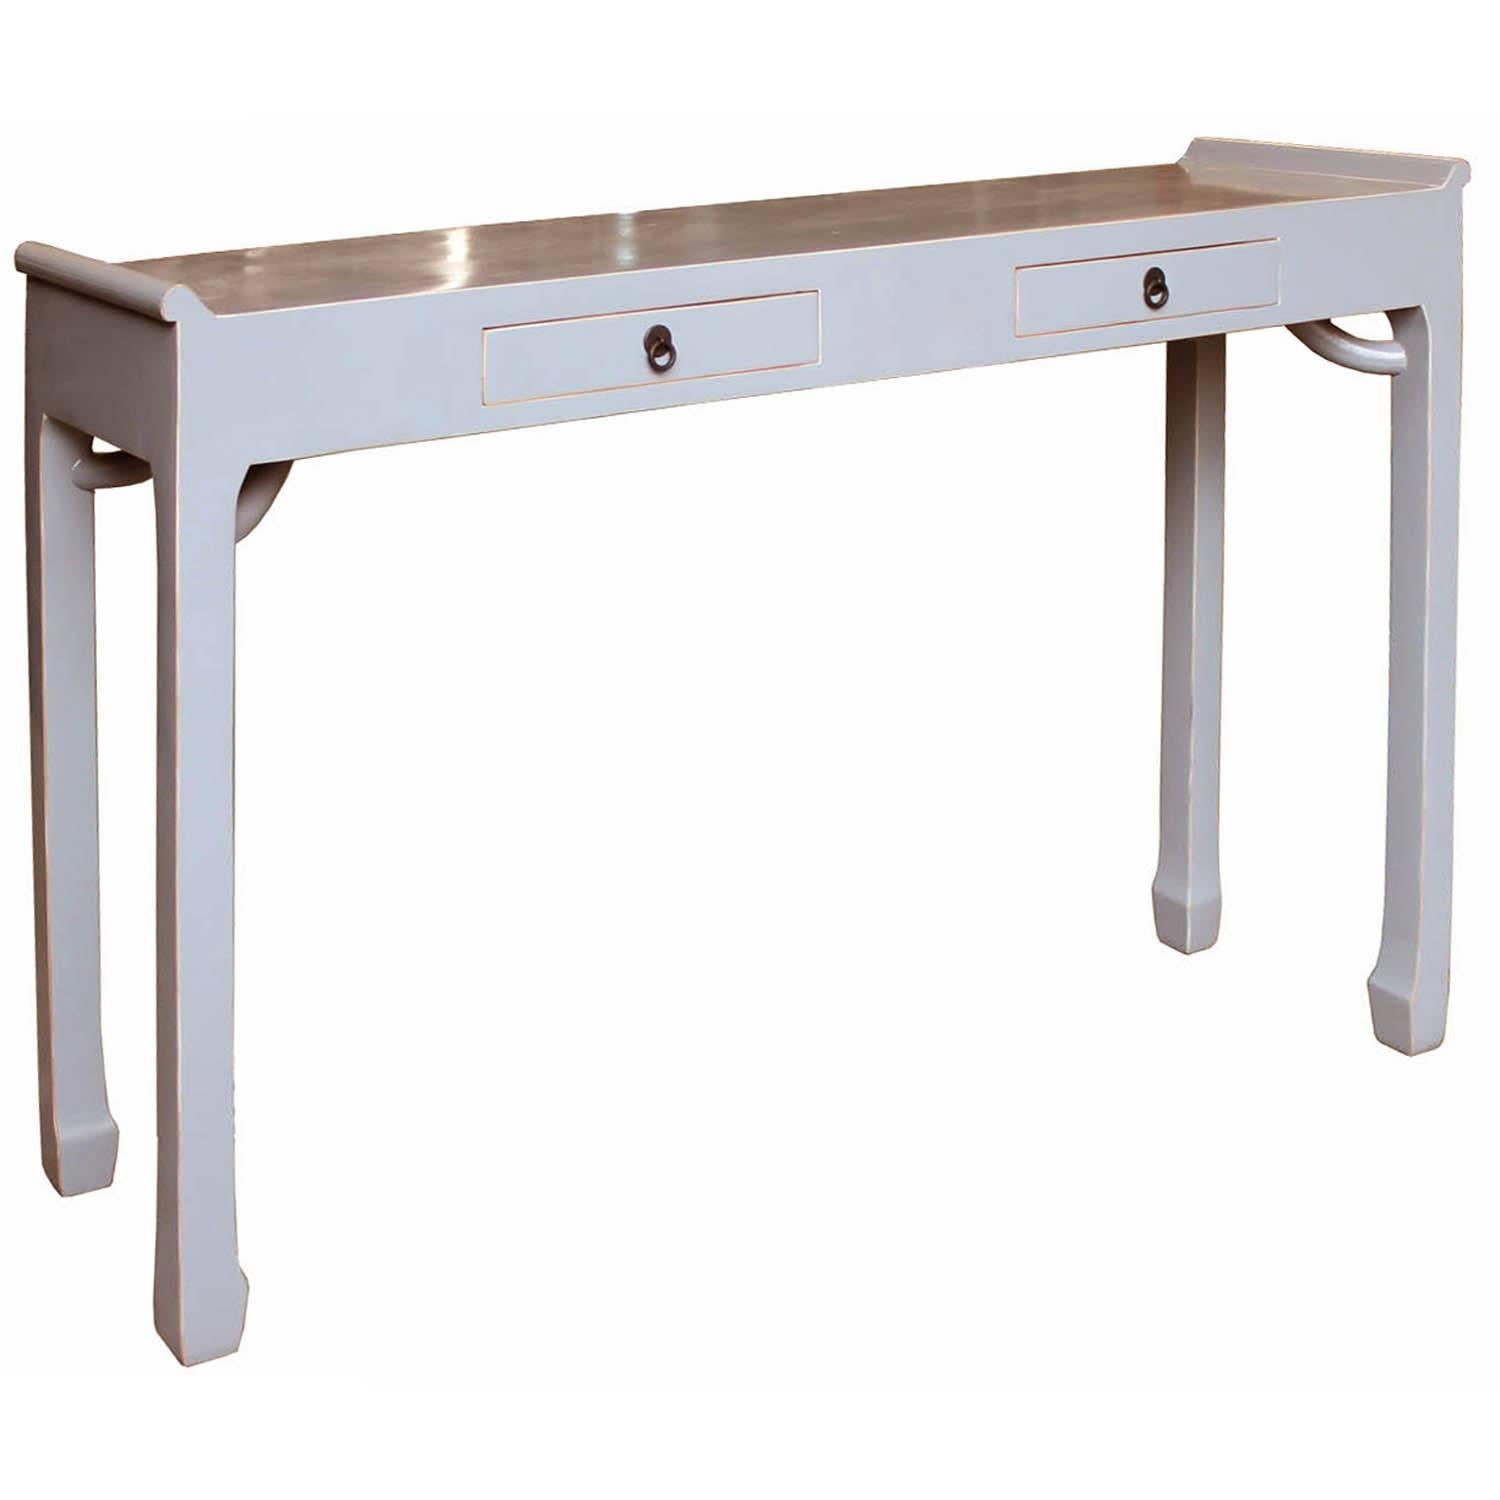 Contemporary two-drawer gray lacquer console table with curved arm braces below the top surface and elegant horse hoof-style feet. Use behind a sofa, in an entryway or at the end of a hallway.